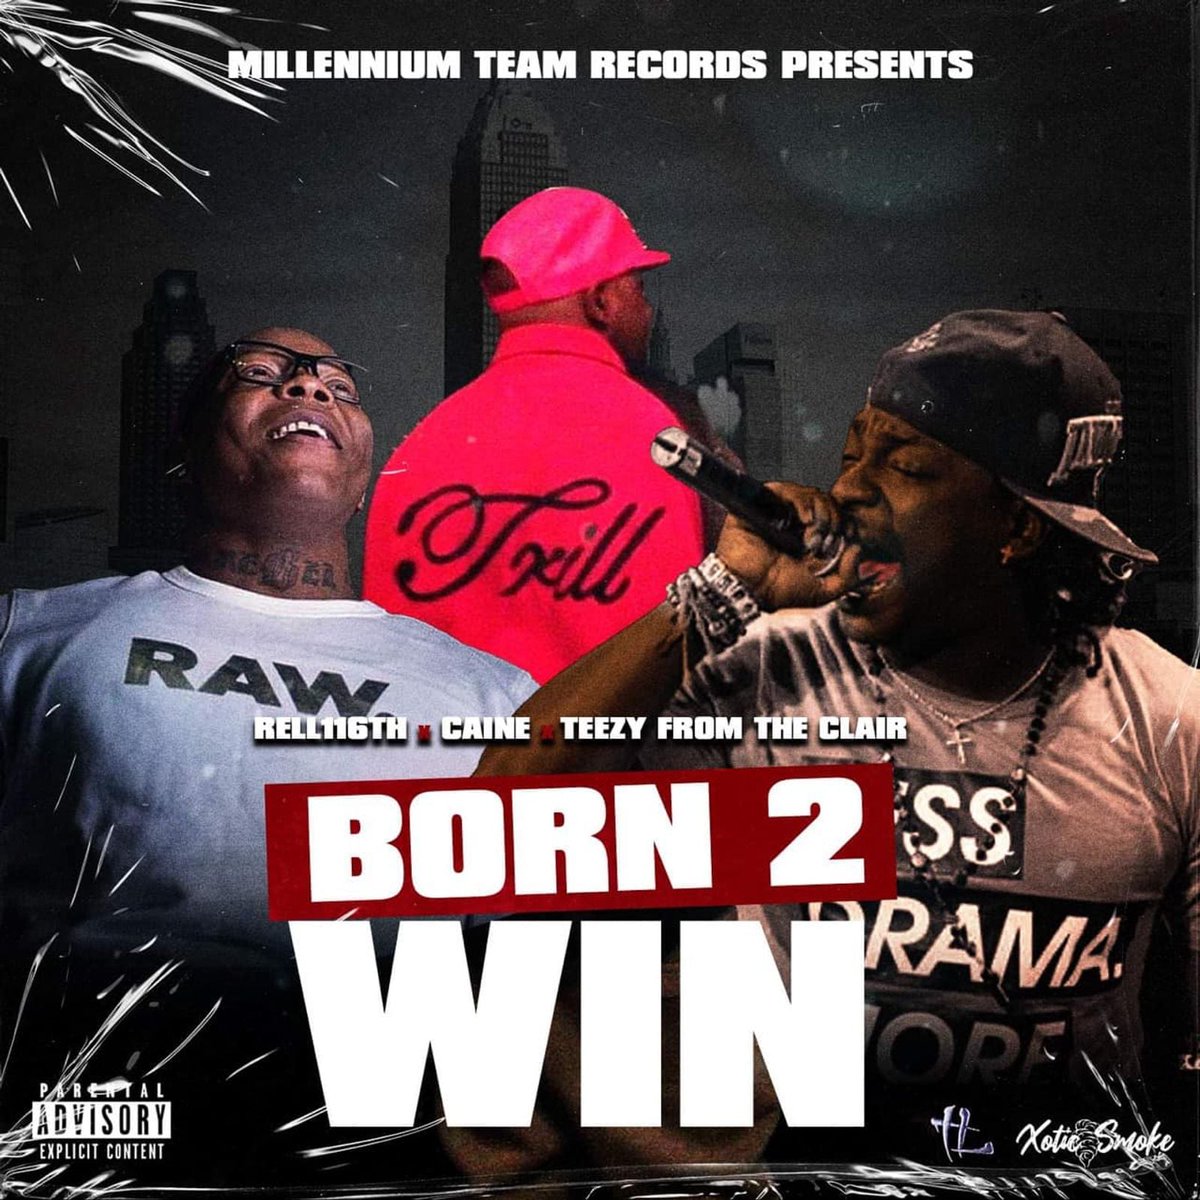 #VictoryTuesday #ClevelandHipHop 'Born 2 Win' @rell116th feat. @stclairteezy & @Caine216 prod. by: @TrackPros on @Spotify #LetEmKnow #ThisIsCle #TheLand #TooTrill #Haaaaaaa🏌🏿‍♂️ open.spotify.com/track/3MPF8ztv…